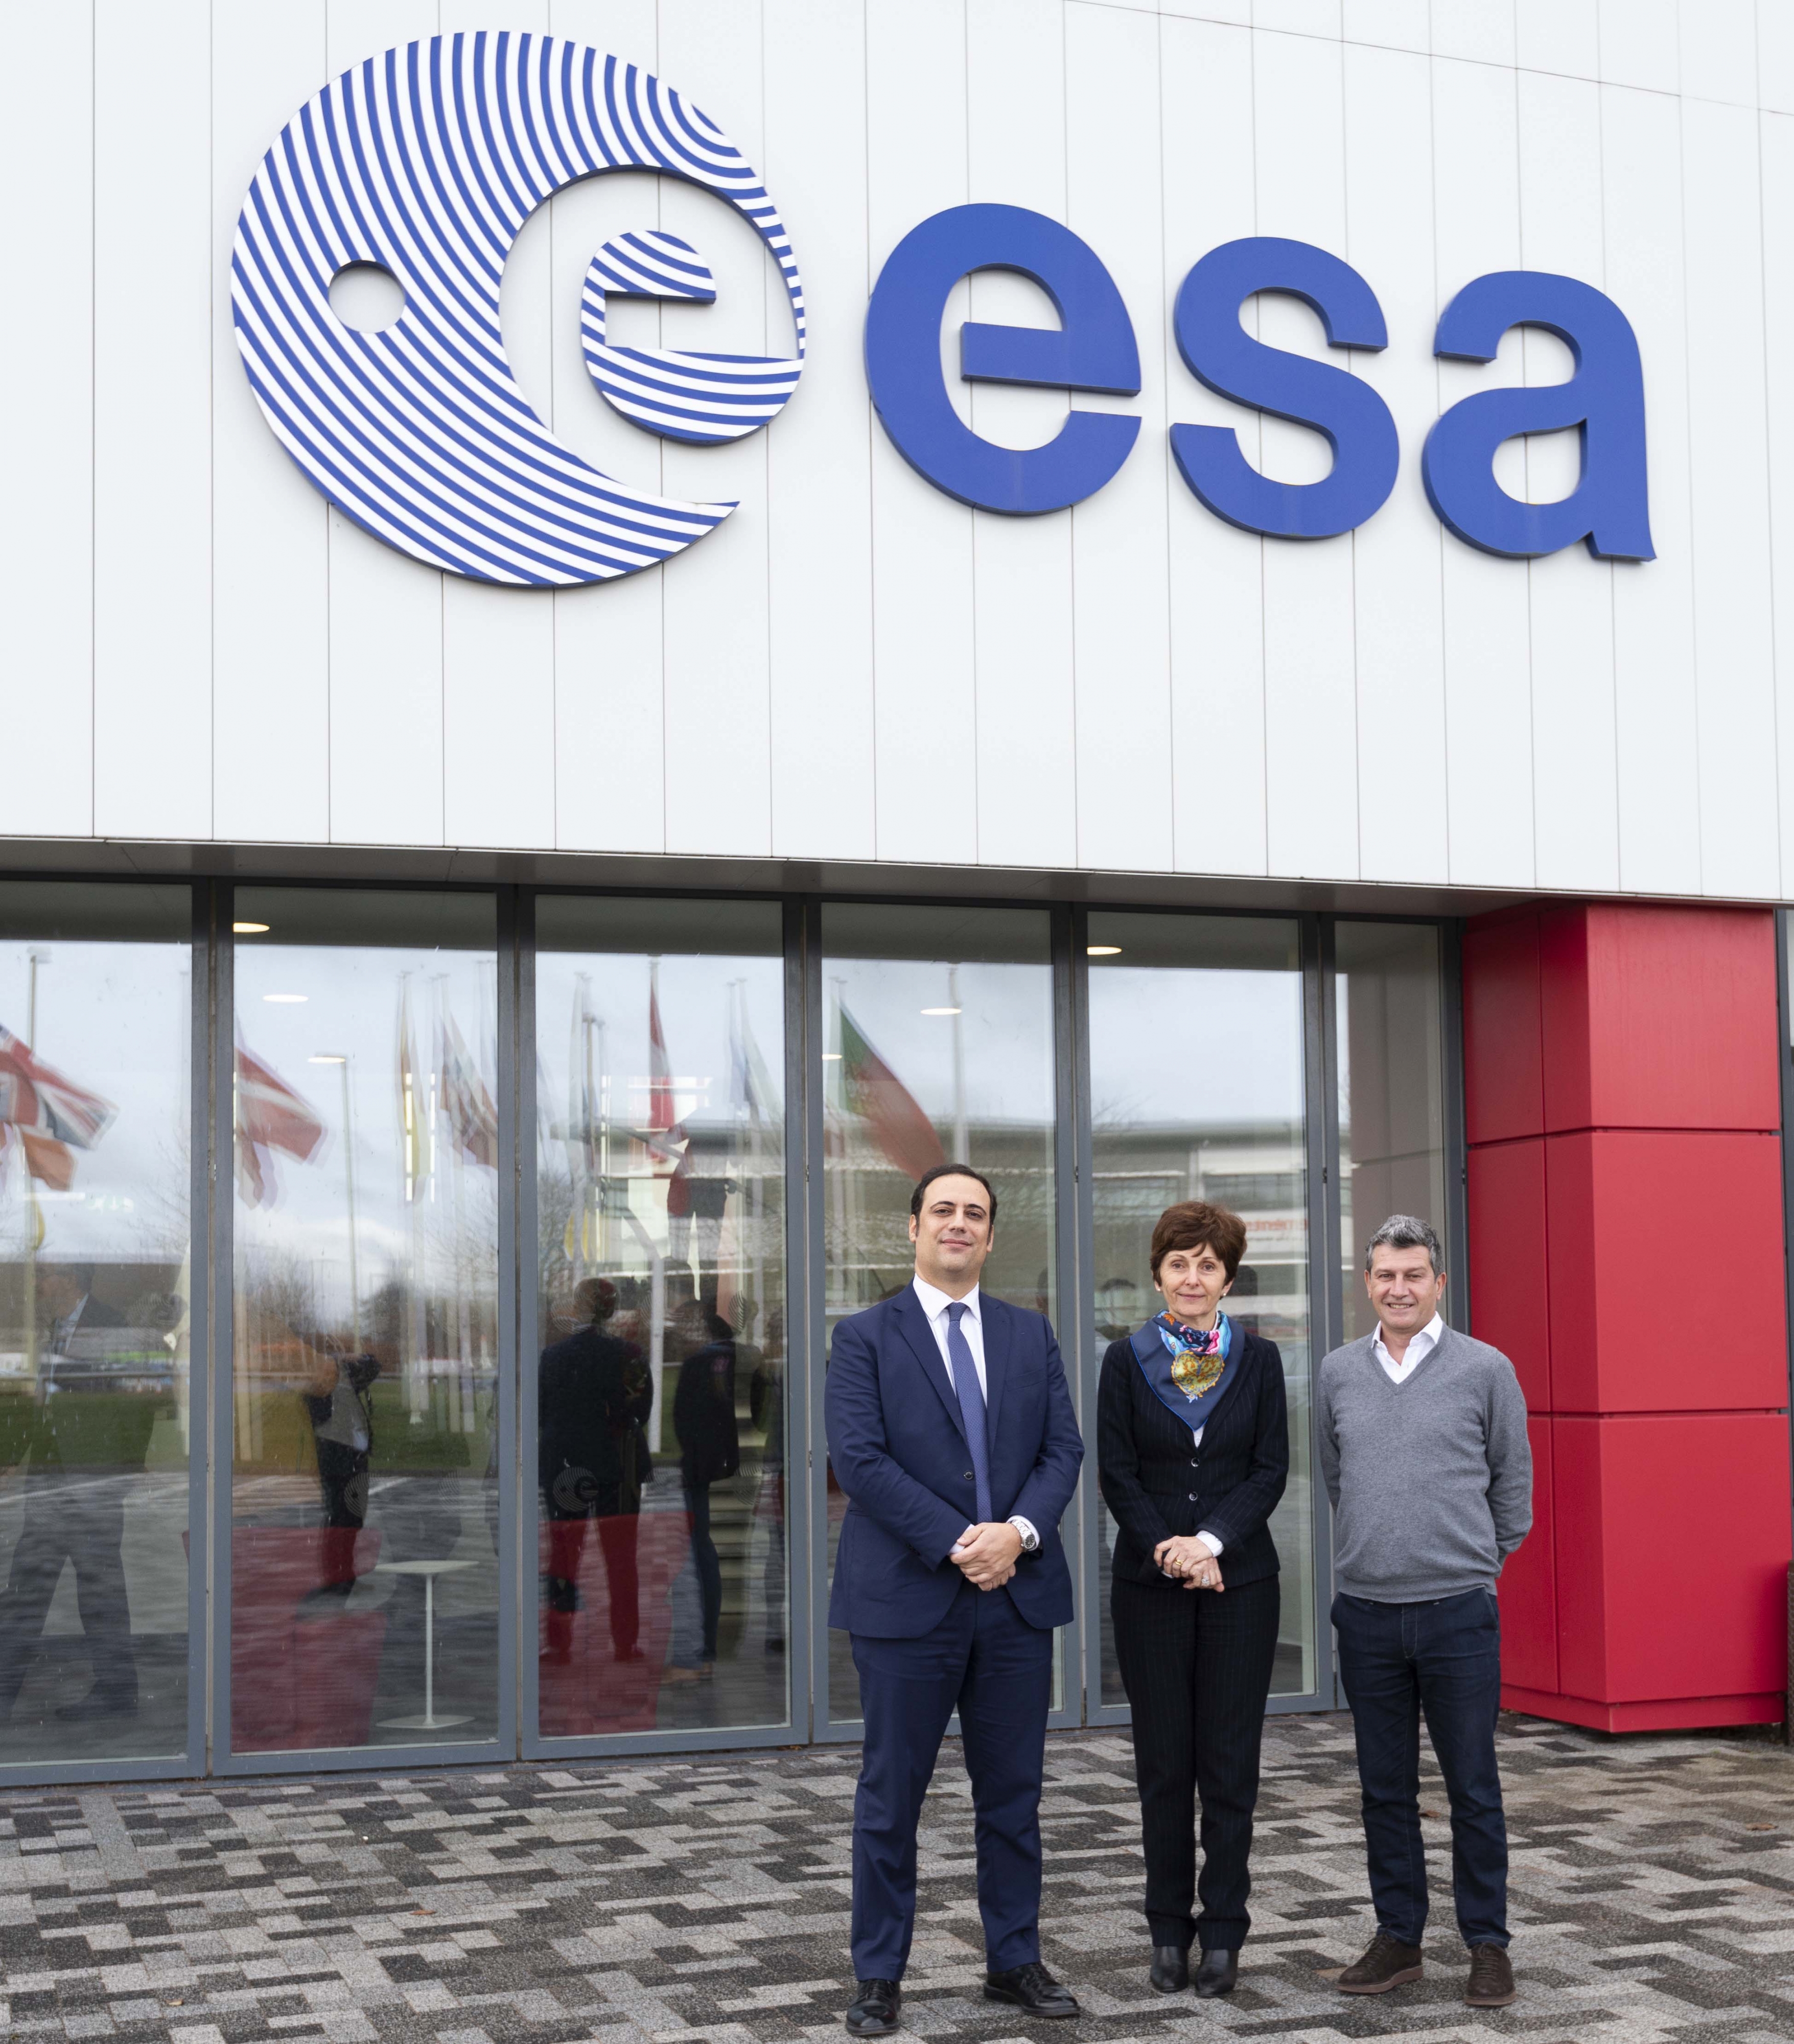 Letter of Intention signing at ECSAT. From left to right: ESA Lorenzo Scatena, Managing Director, Fondazione E. Amaldi, Magali Vaissiere, Director of Telecommunications and Integrated Applications and Gianluca Dettori, Chairman, Primomiglio SGR (Astra Ventures).